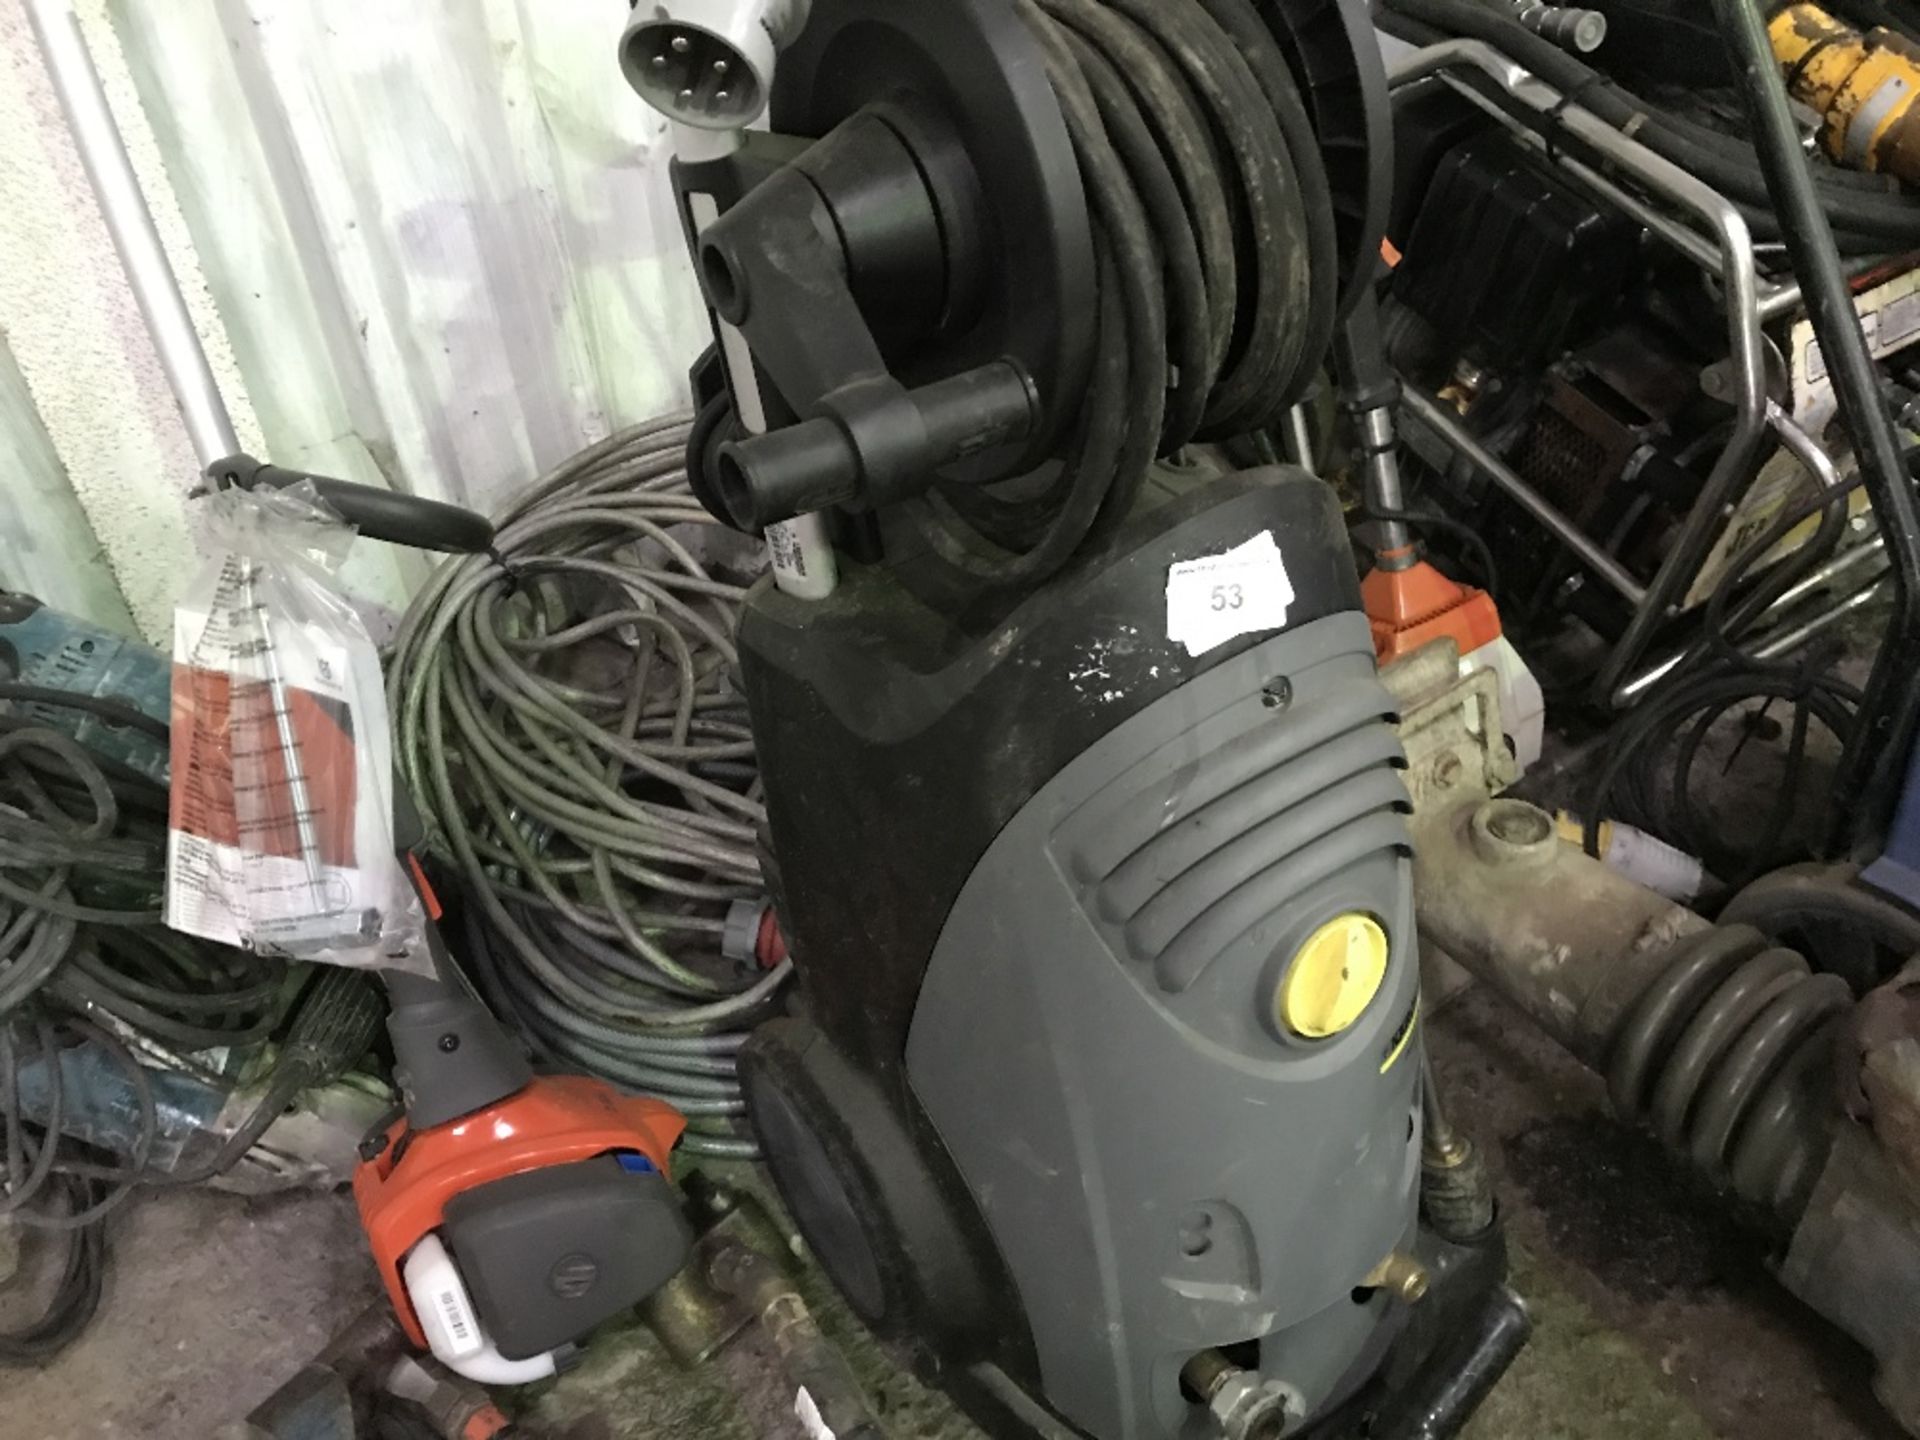 Karcher 3-phase power washer, little used, PLUS EXTENSION CABLES NO VAT ON HAMMER PRICE